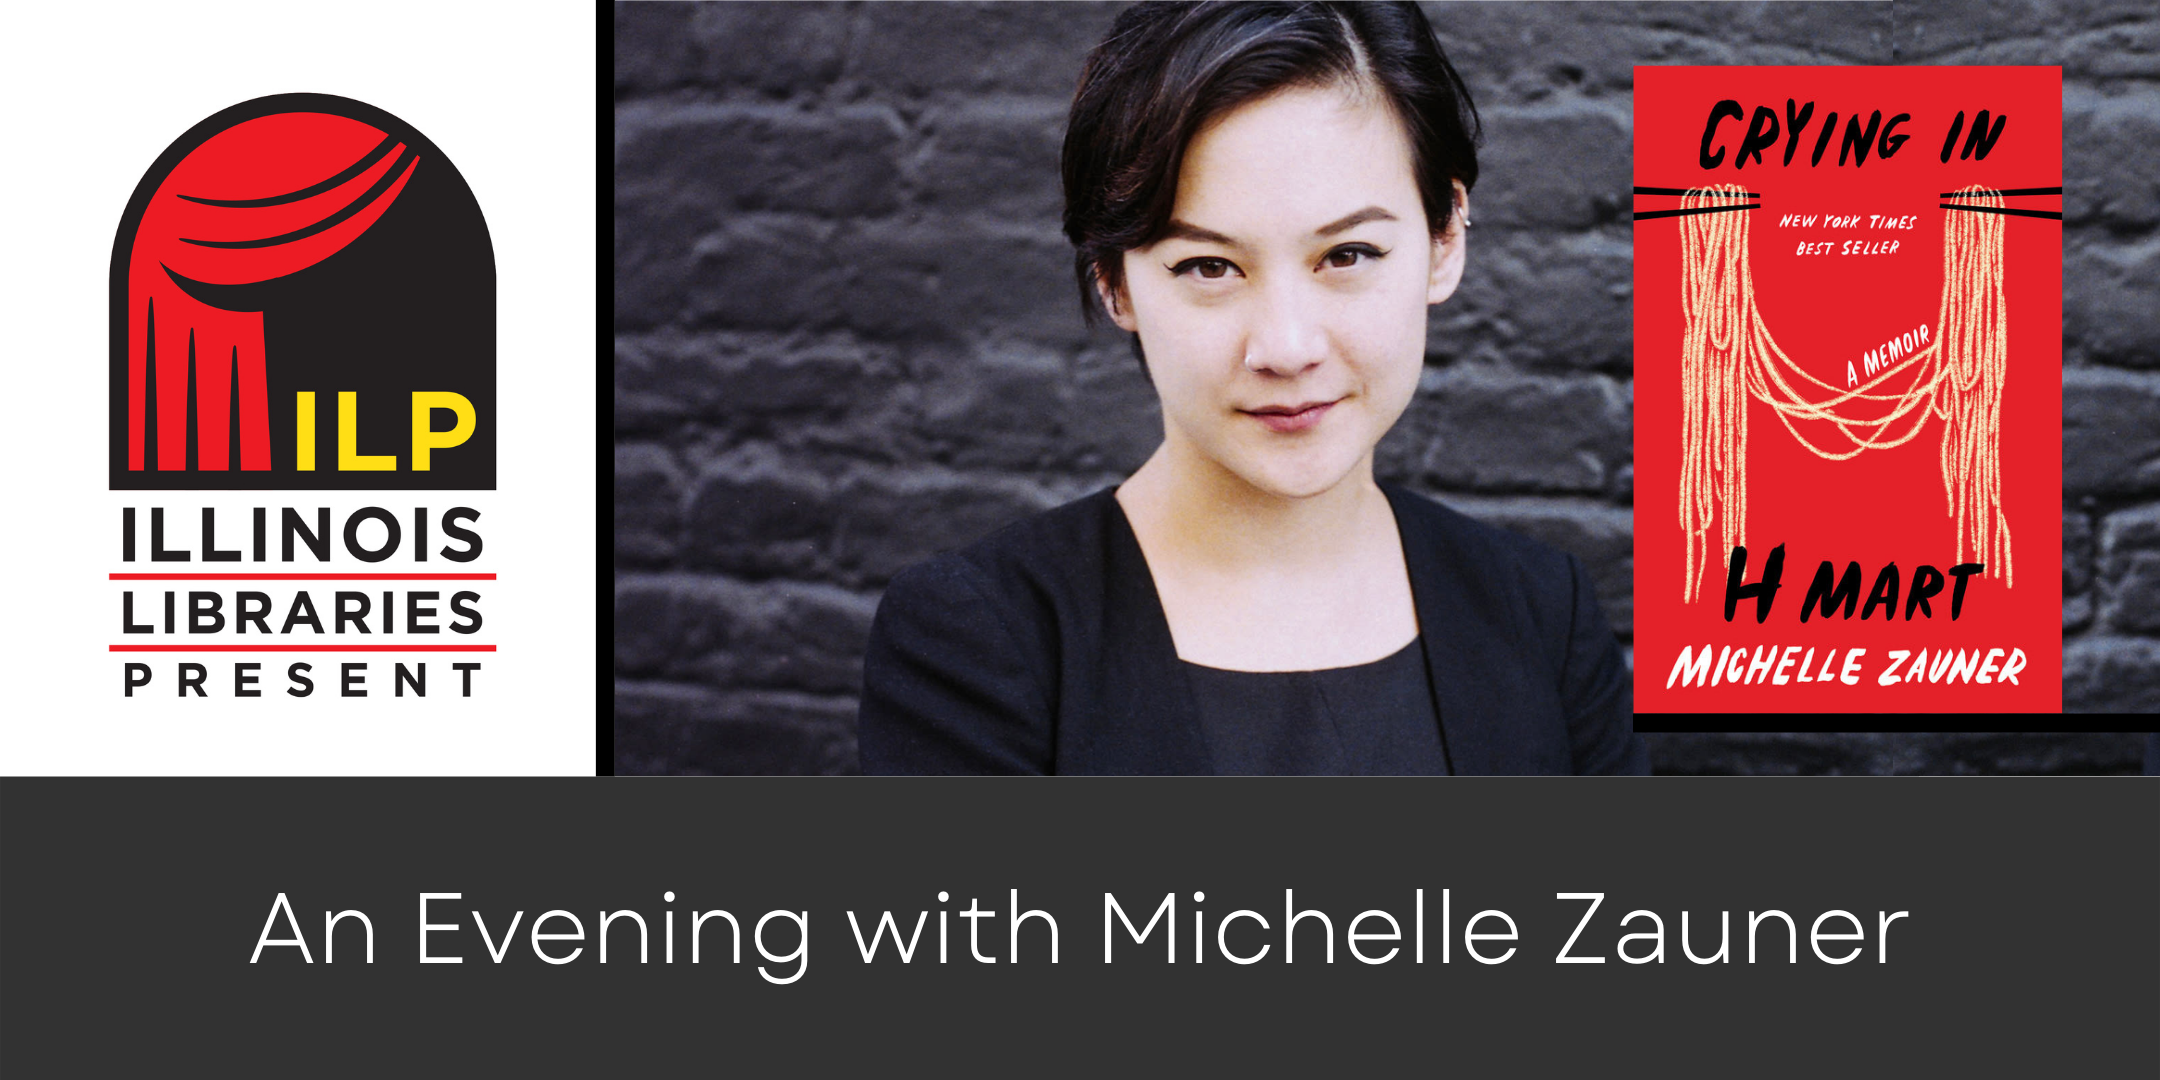 image of "Illinois Libraries Present: An Evening with Michelle Zauner"